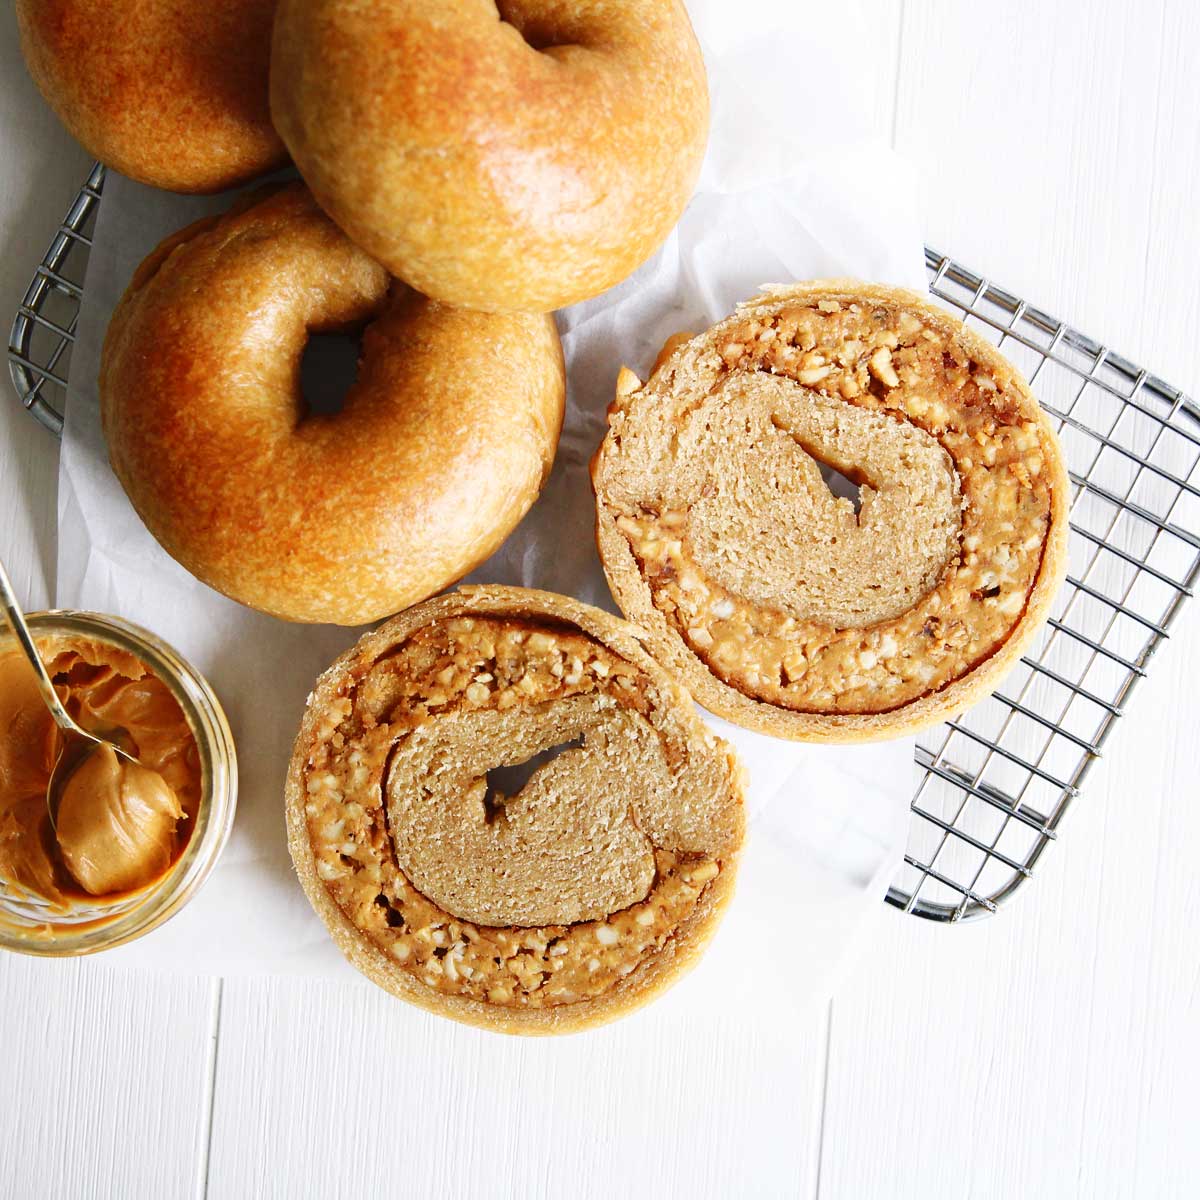 I Stuffed a Bagel With Peanut Butter! High Protein PB Stuffed Bagels Recipe - Peanut Butter Glaze